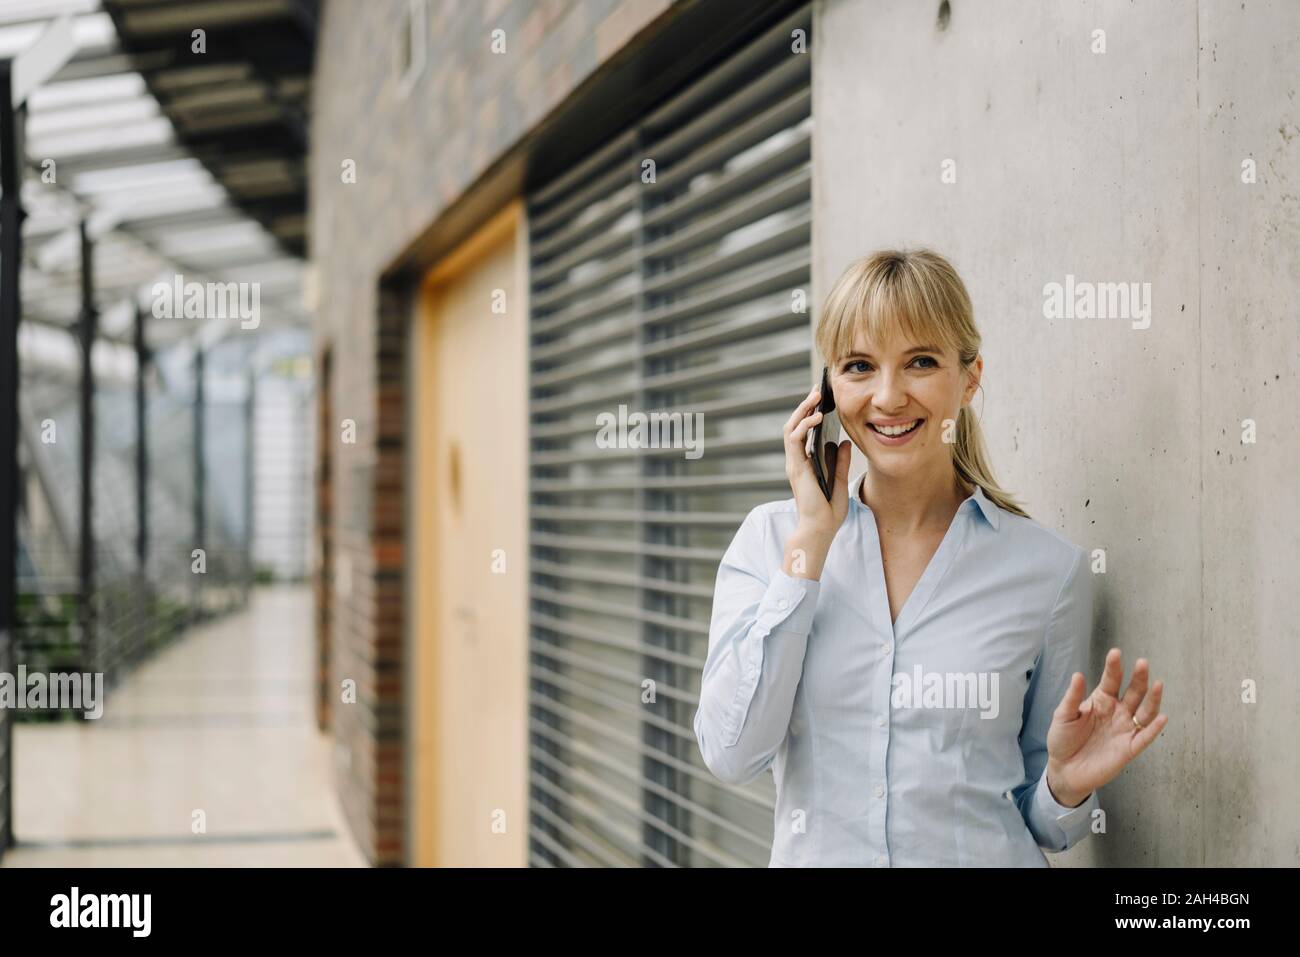 Portrait of a smiling young woman on the phone Banque D'Images